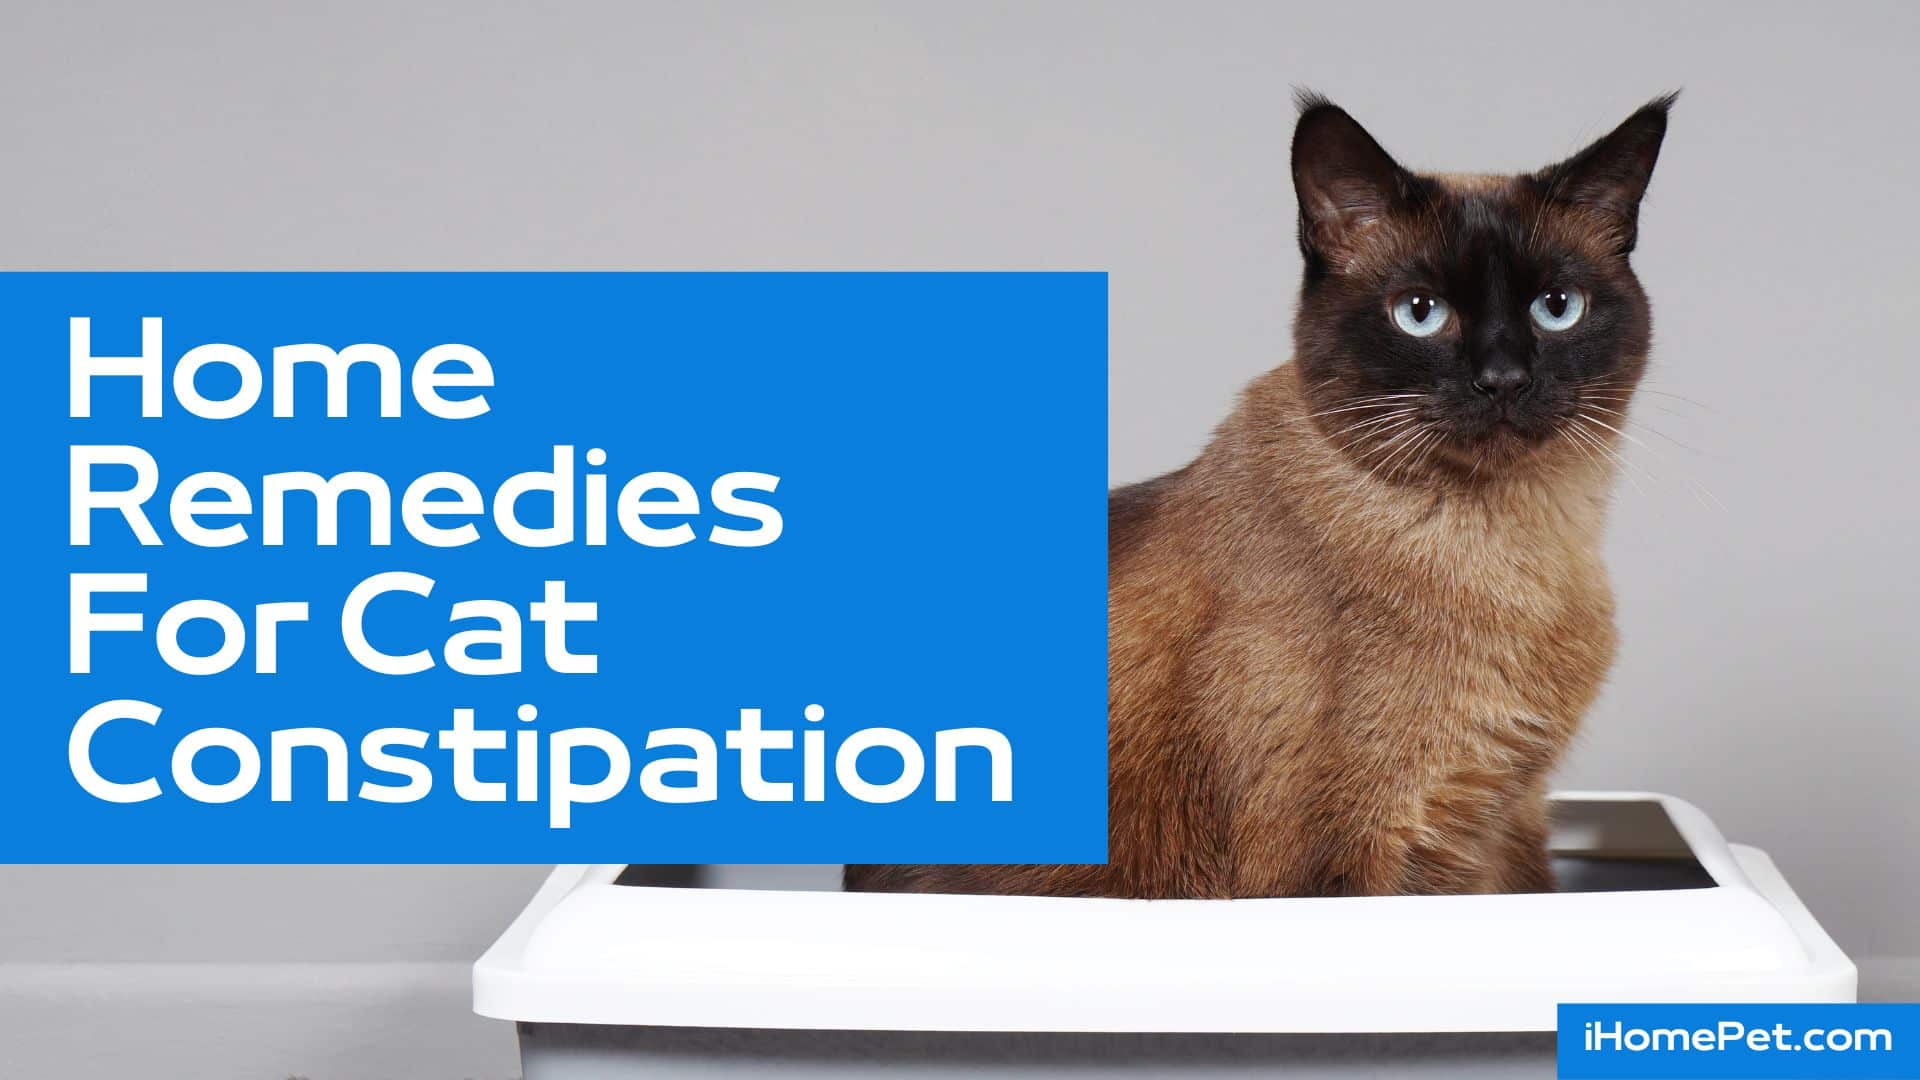 Symptoms why there is a cat constipated